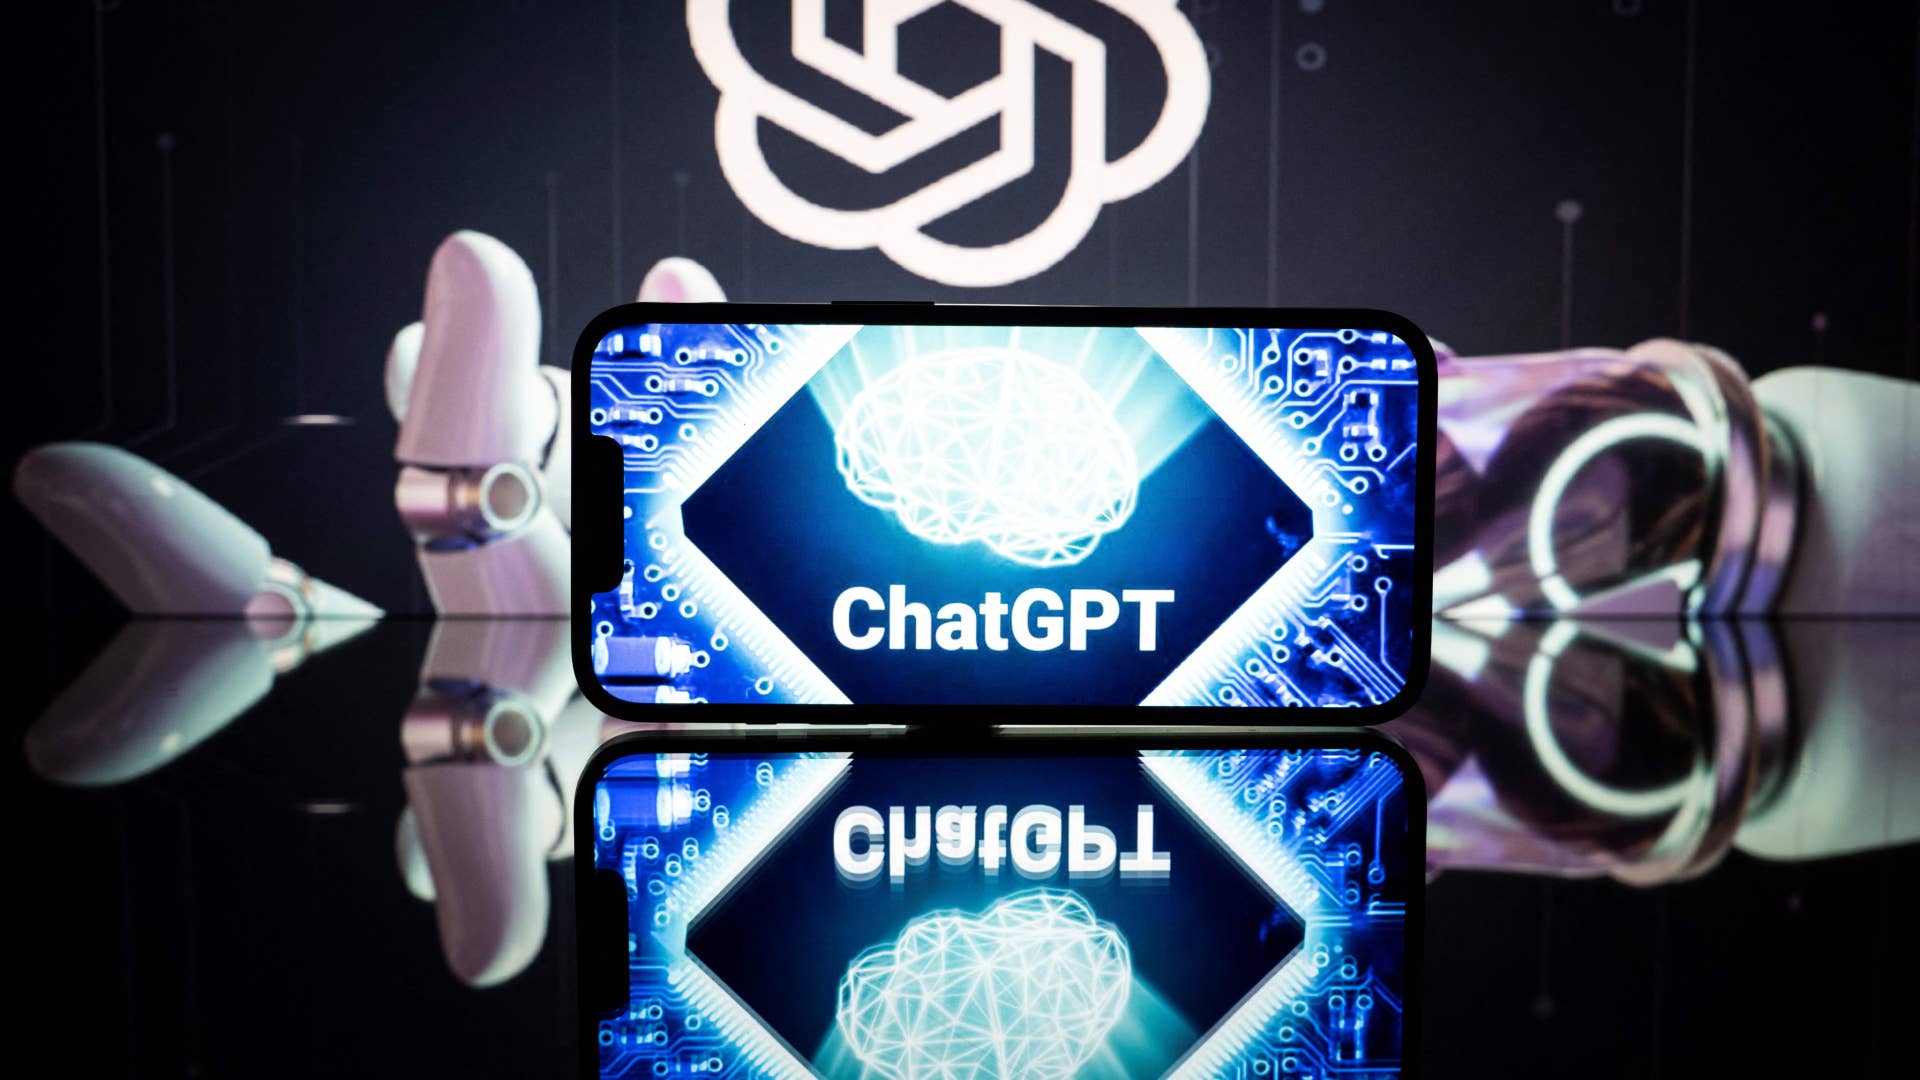 ChatGPT bot is pictured in logo form